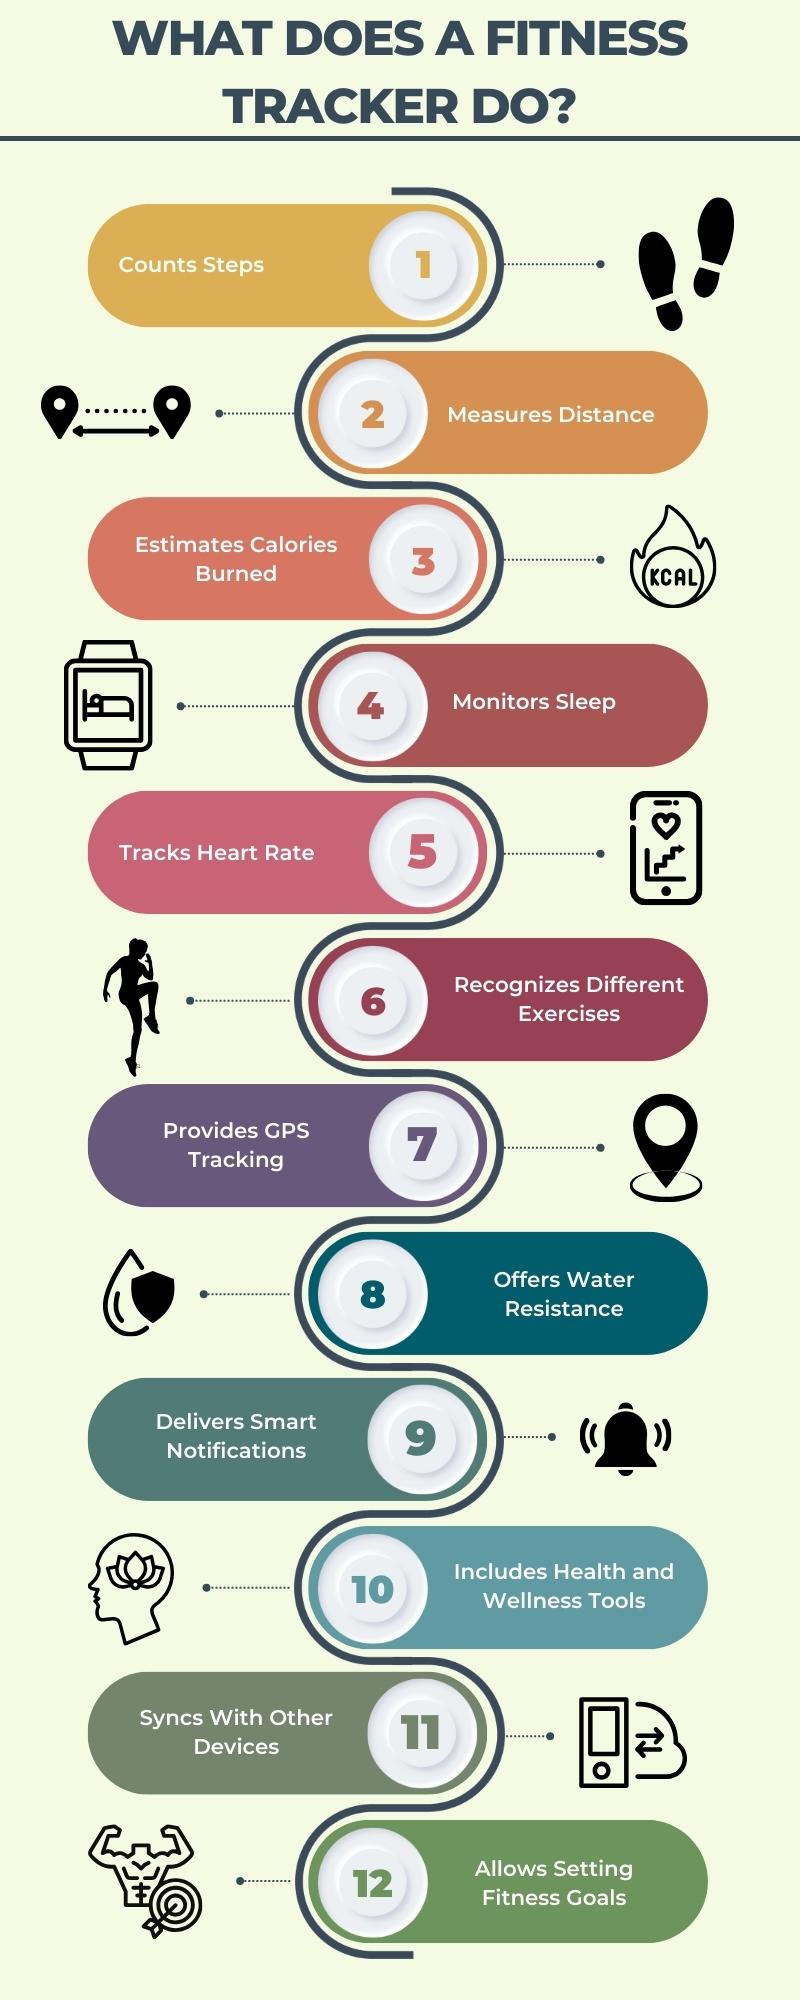 The infographic shows what a fitness tracker does. What fitness trackers do is count steps, measure distance, estimate calories burned, monitor sleep, track heart rate, recognize different exercises, provide GPS tracking, deliver smart notifications, allow setting fitness goals, and much more. 